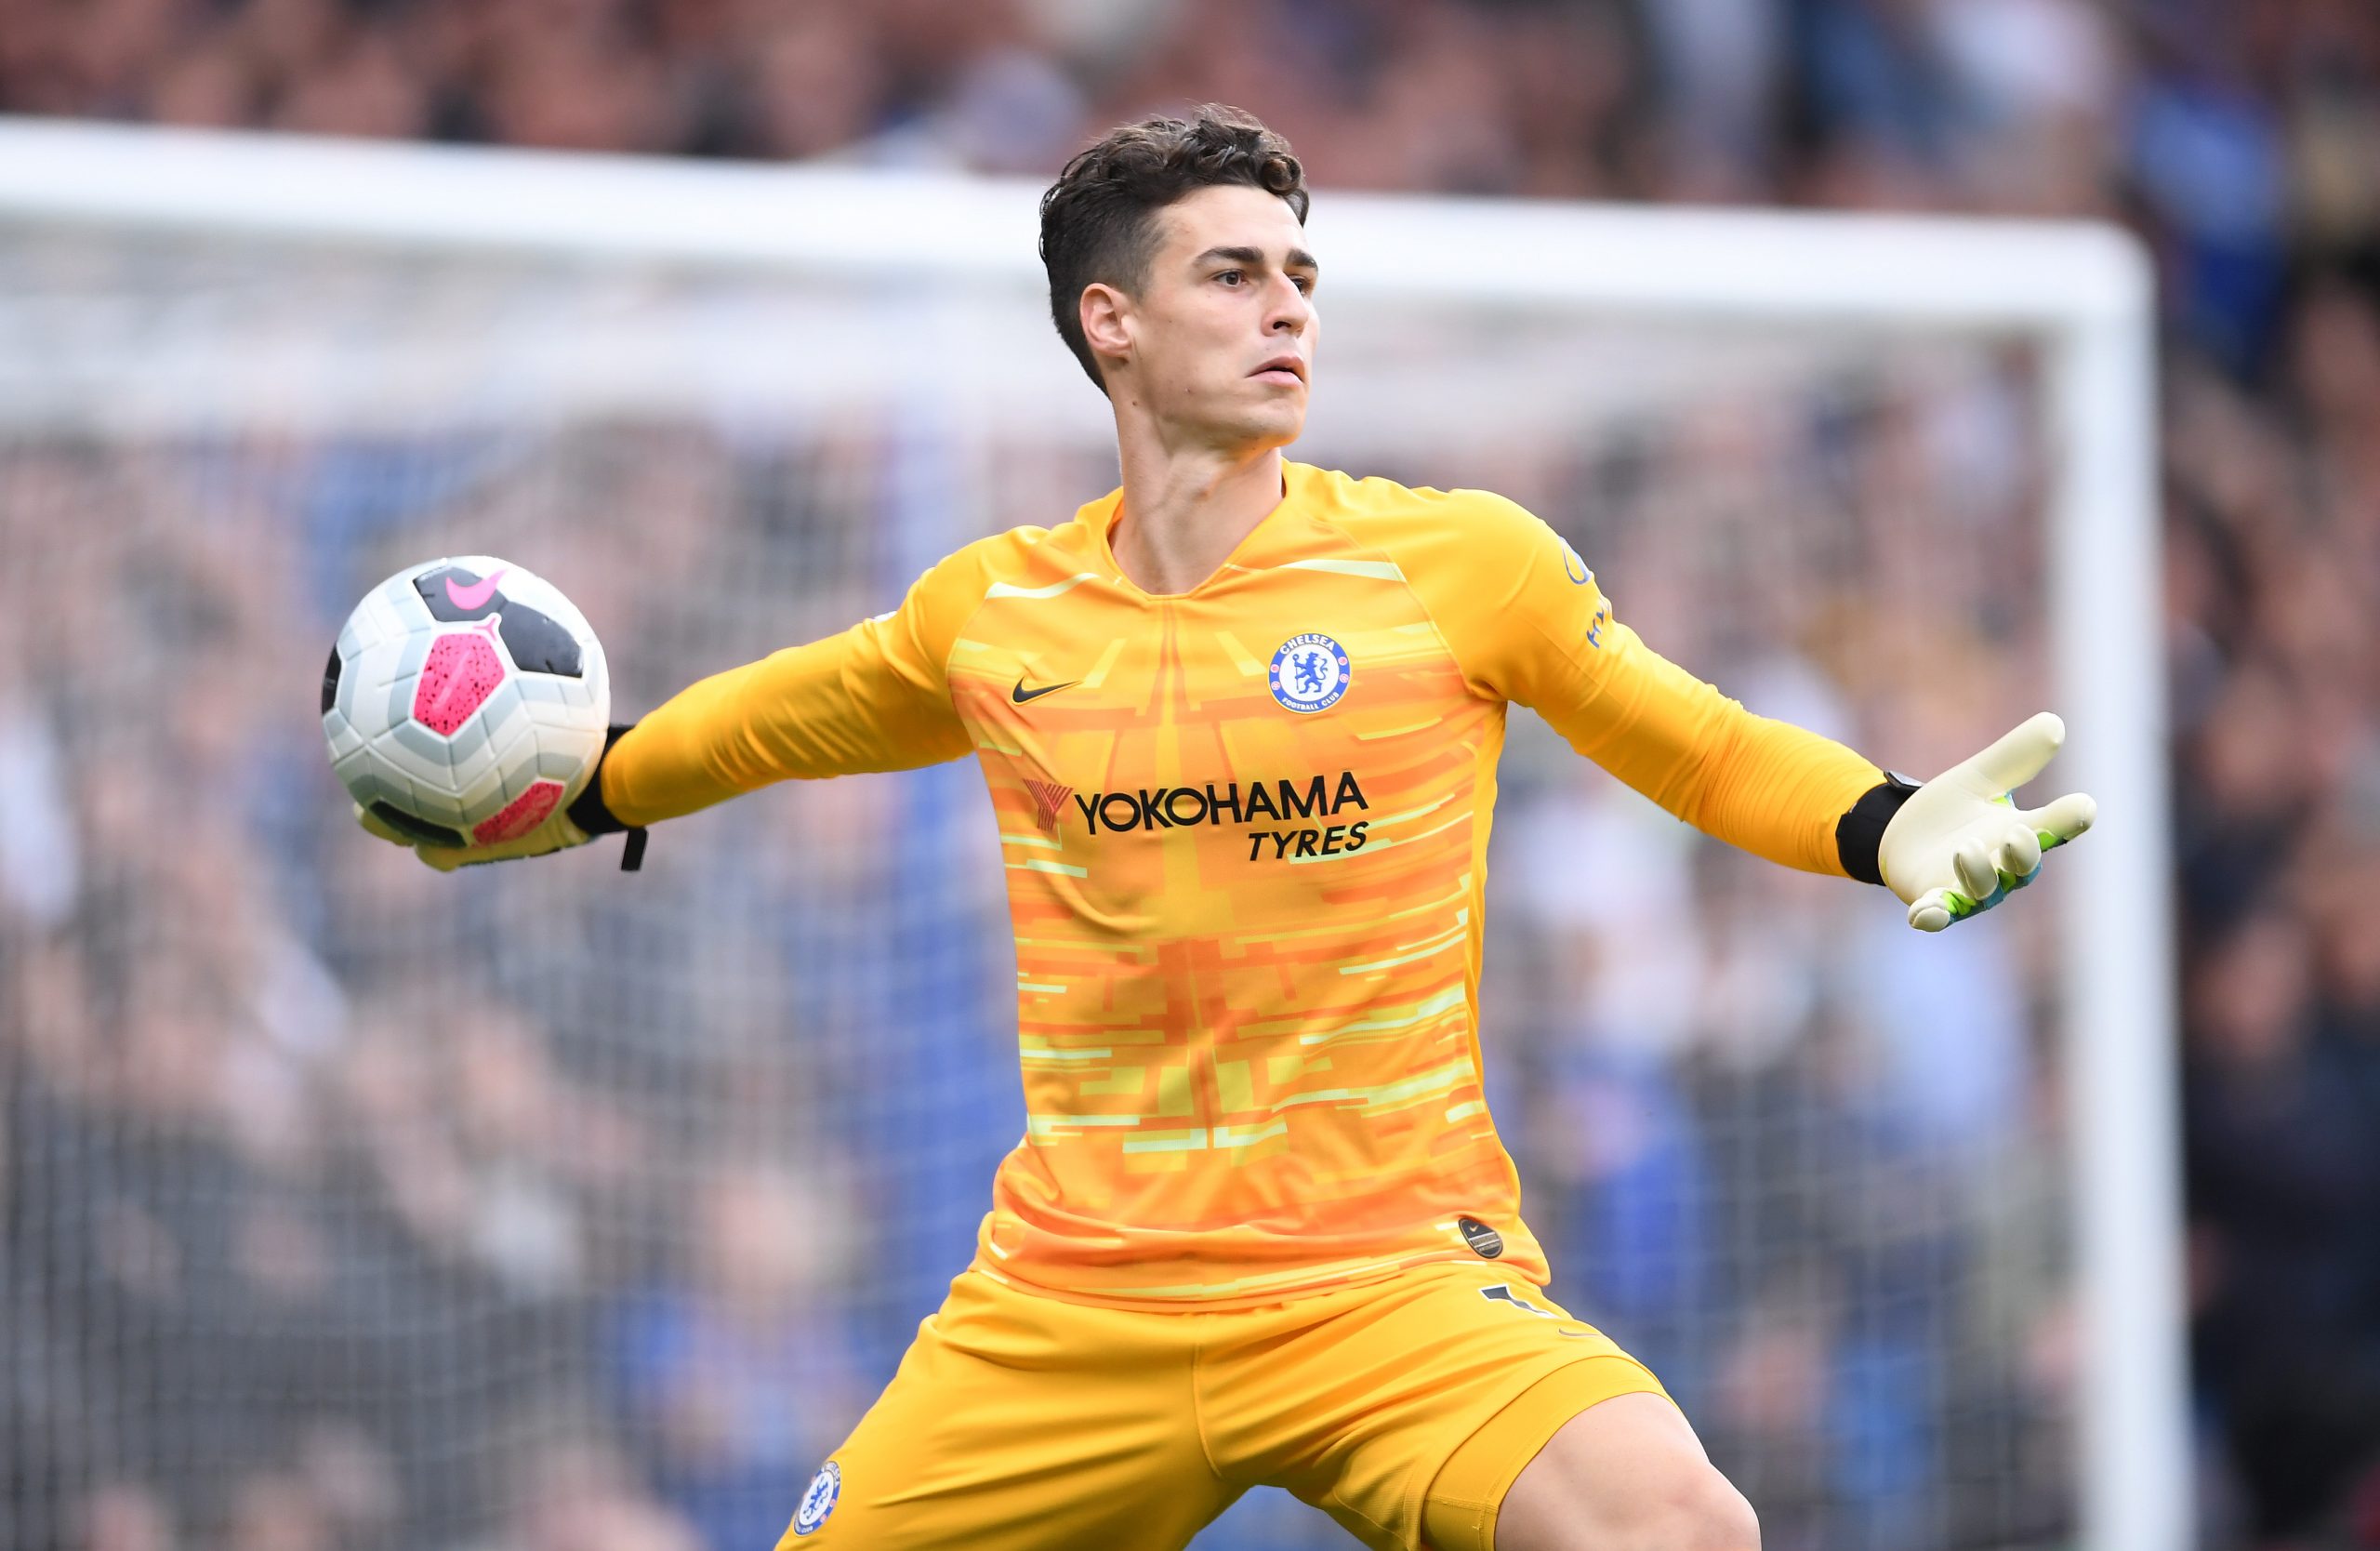 Chelsea star Kepa Arrizabalaga opens up on competition, lack of game time and shoot-out heroics in Blue.